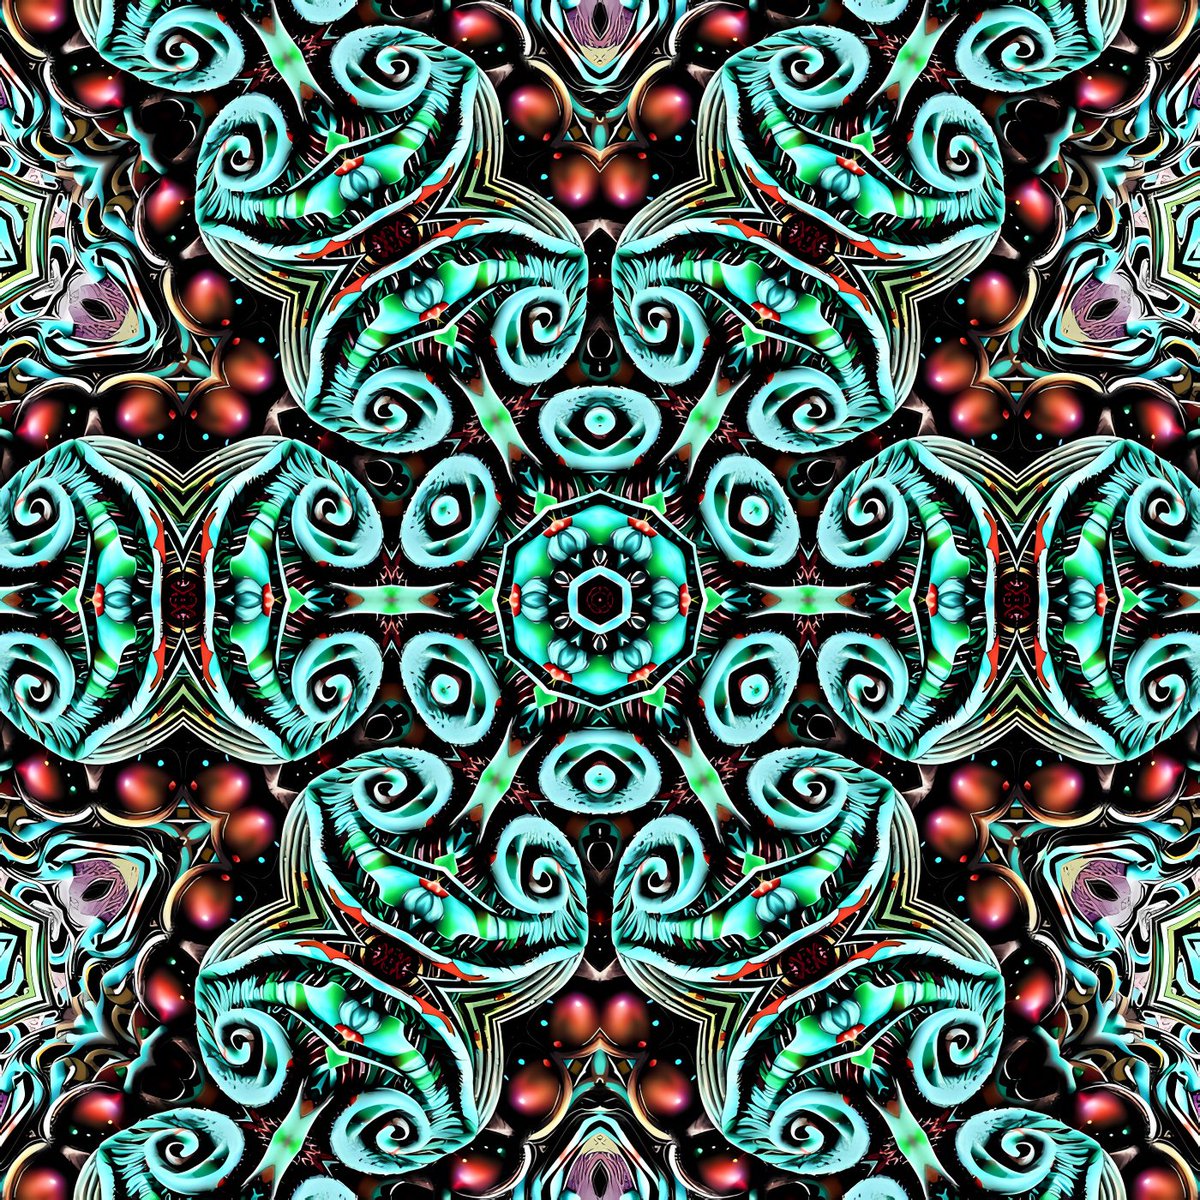 The Bath
2023 
#kaleidosaturday #psychedelics #colorfulart #abstractart #vincentrich #trippy #bohohippie